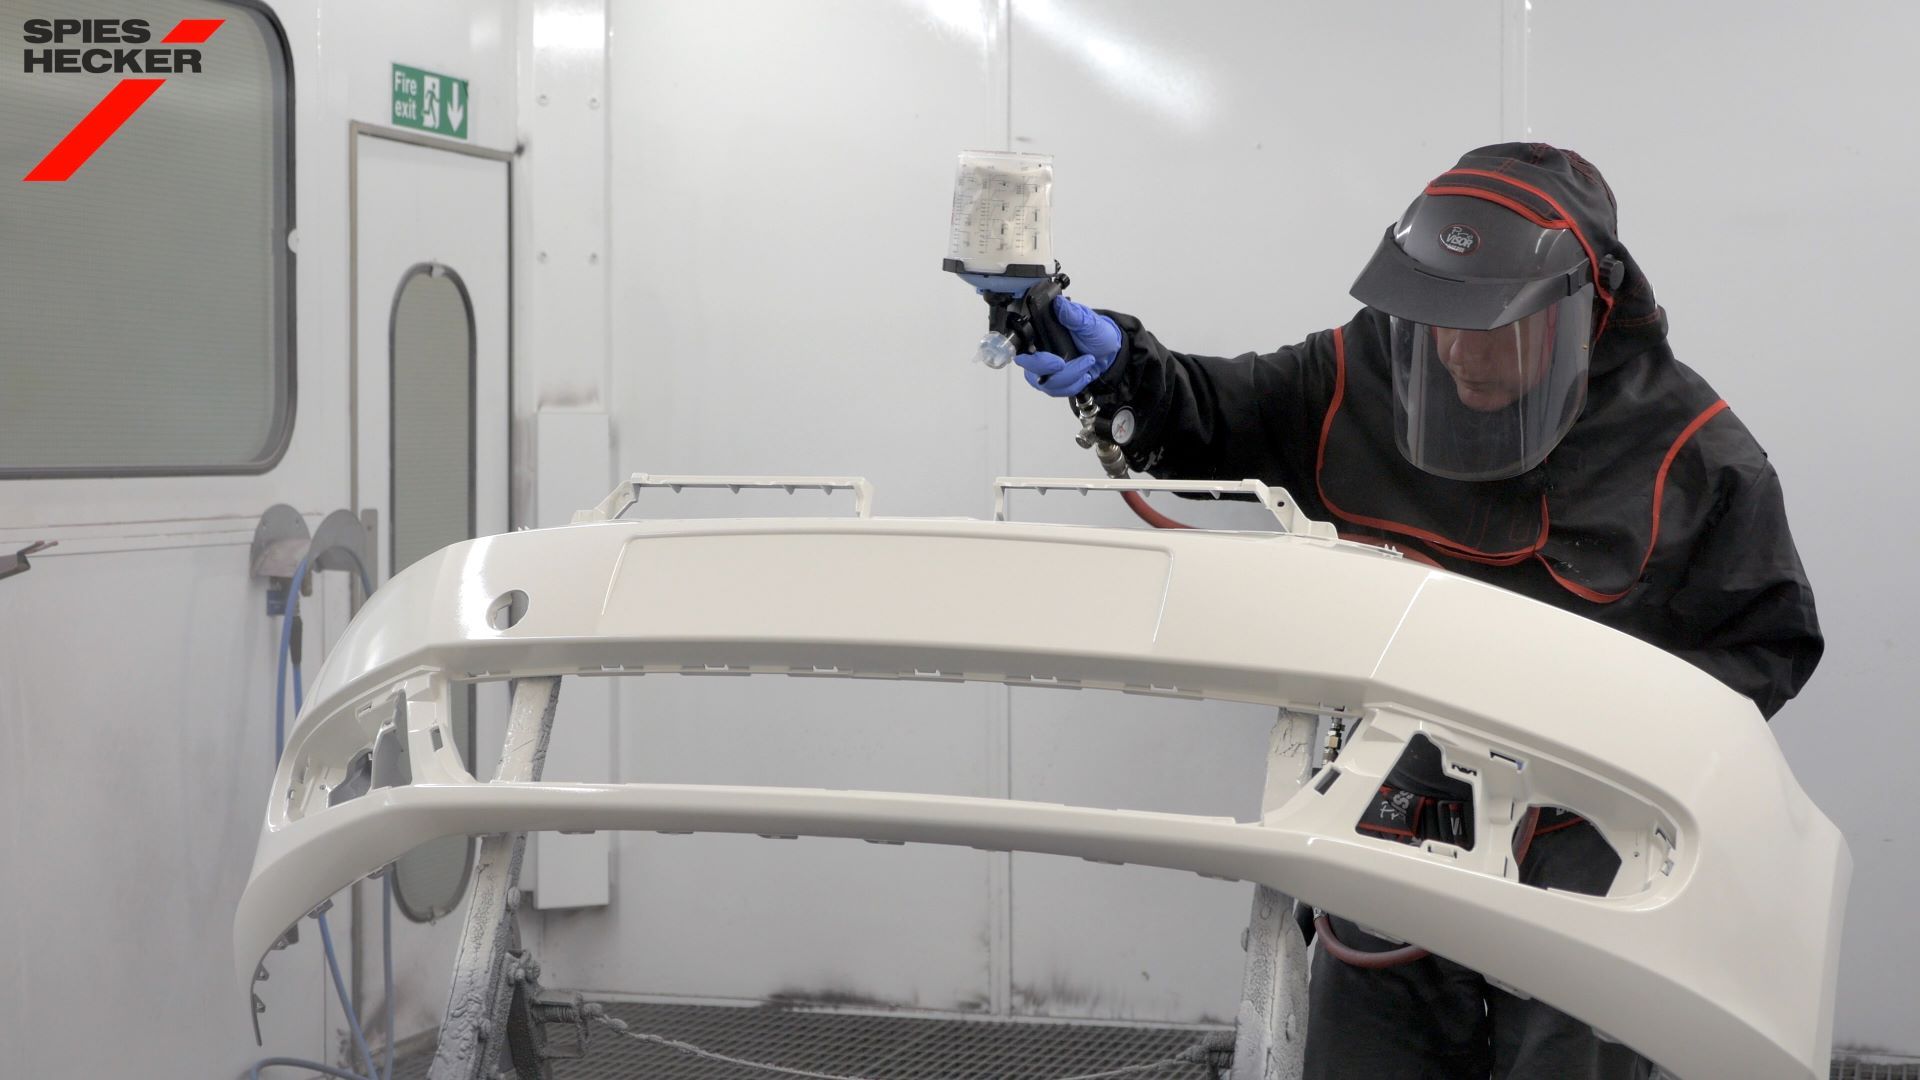 Spies Hecker helps refinishers prepare new plastic parts reliably and quickly